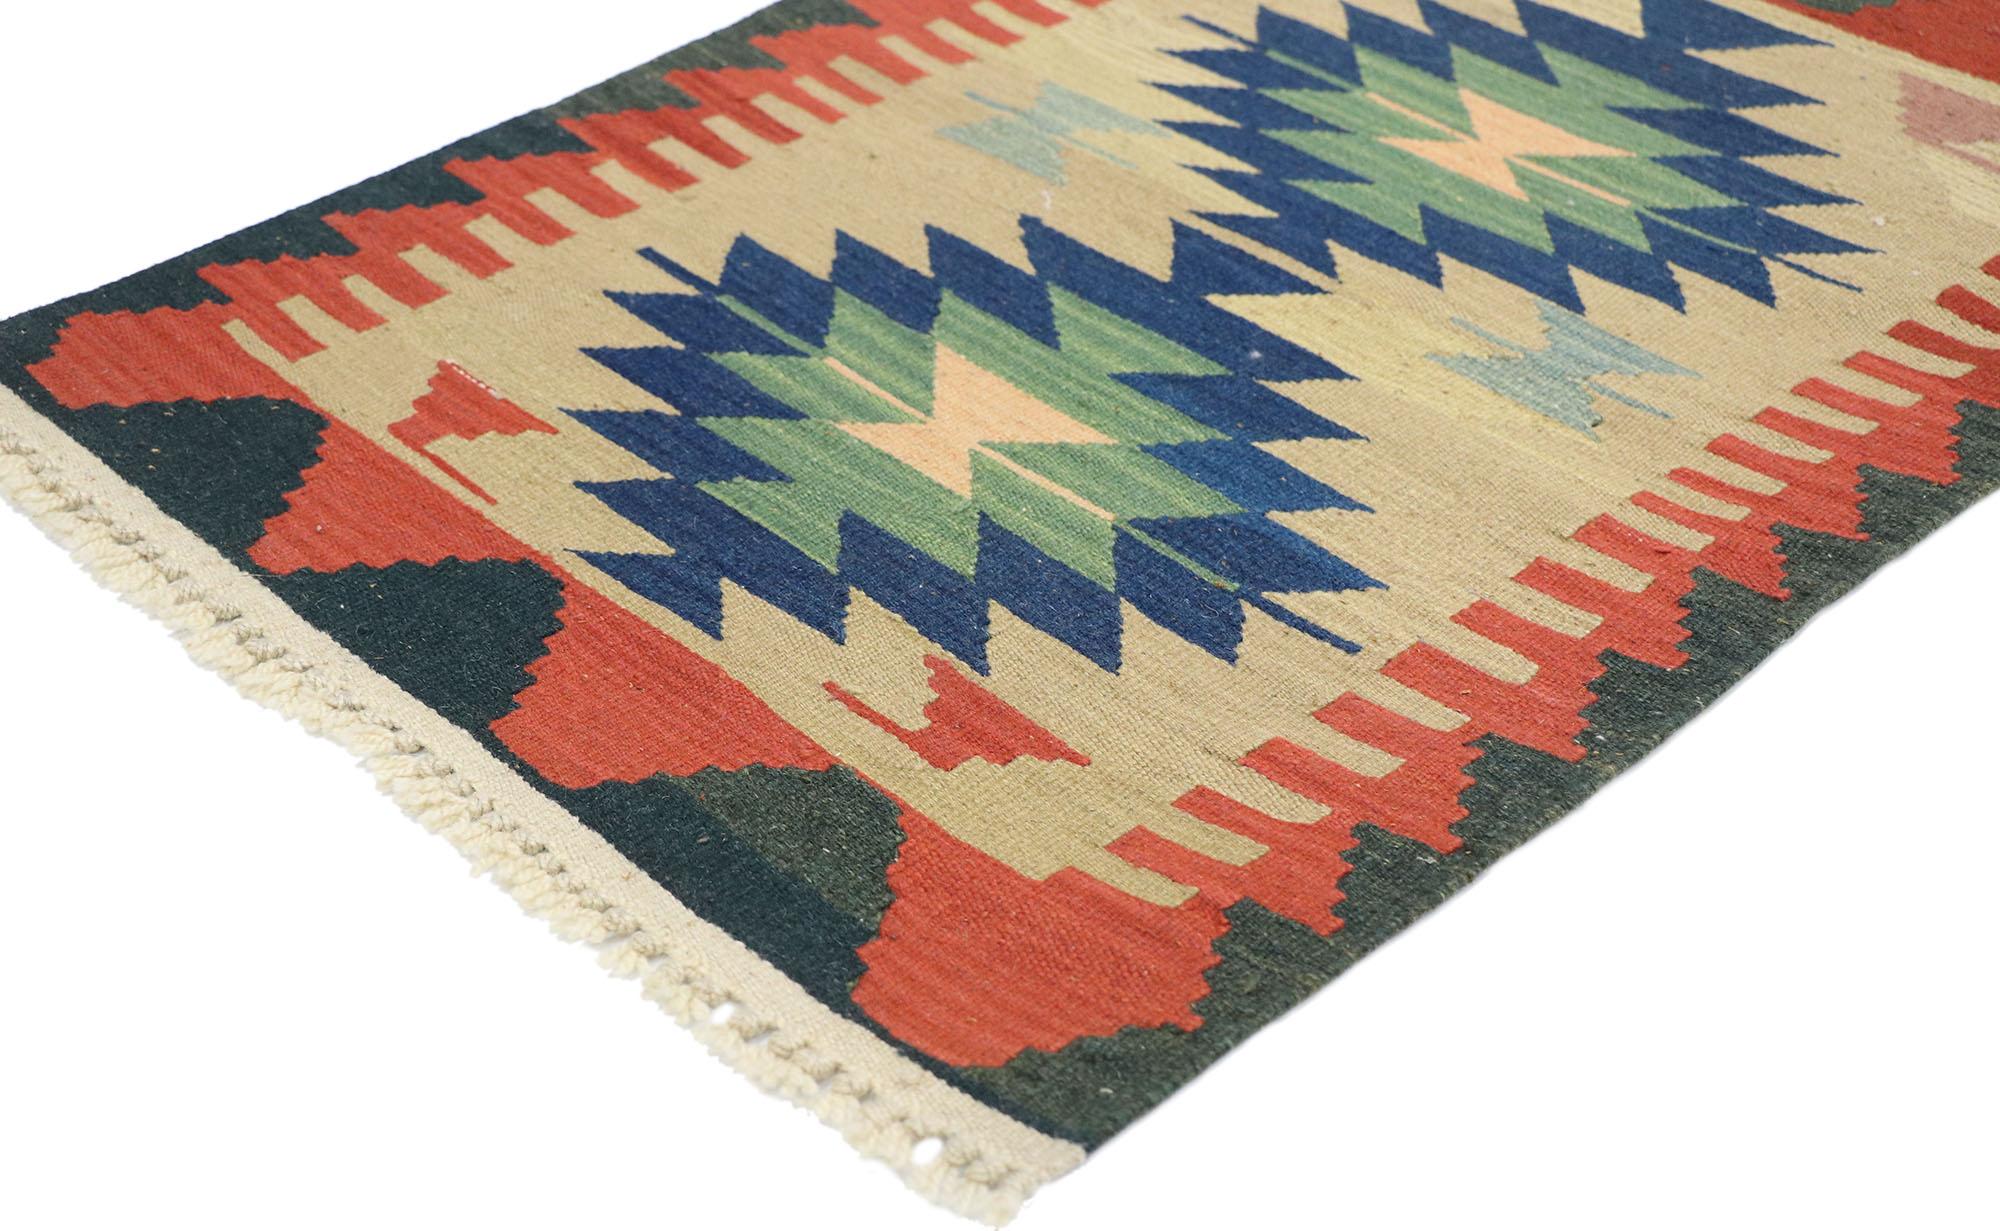 77888 vintage Persian Shiraz Kilim rug with Bohemian Tribal style 02'00 x 02'10. Full of tiny details and a bold expressive design combined with vibrant colors and tribal style, this hand-woven wool vintage Persian Shiraz kilim rug is a captivating